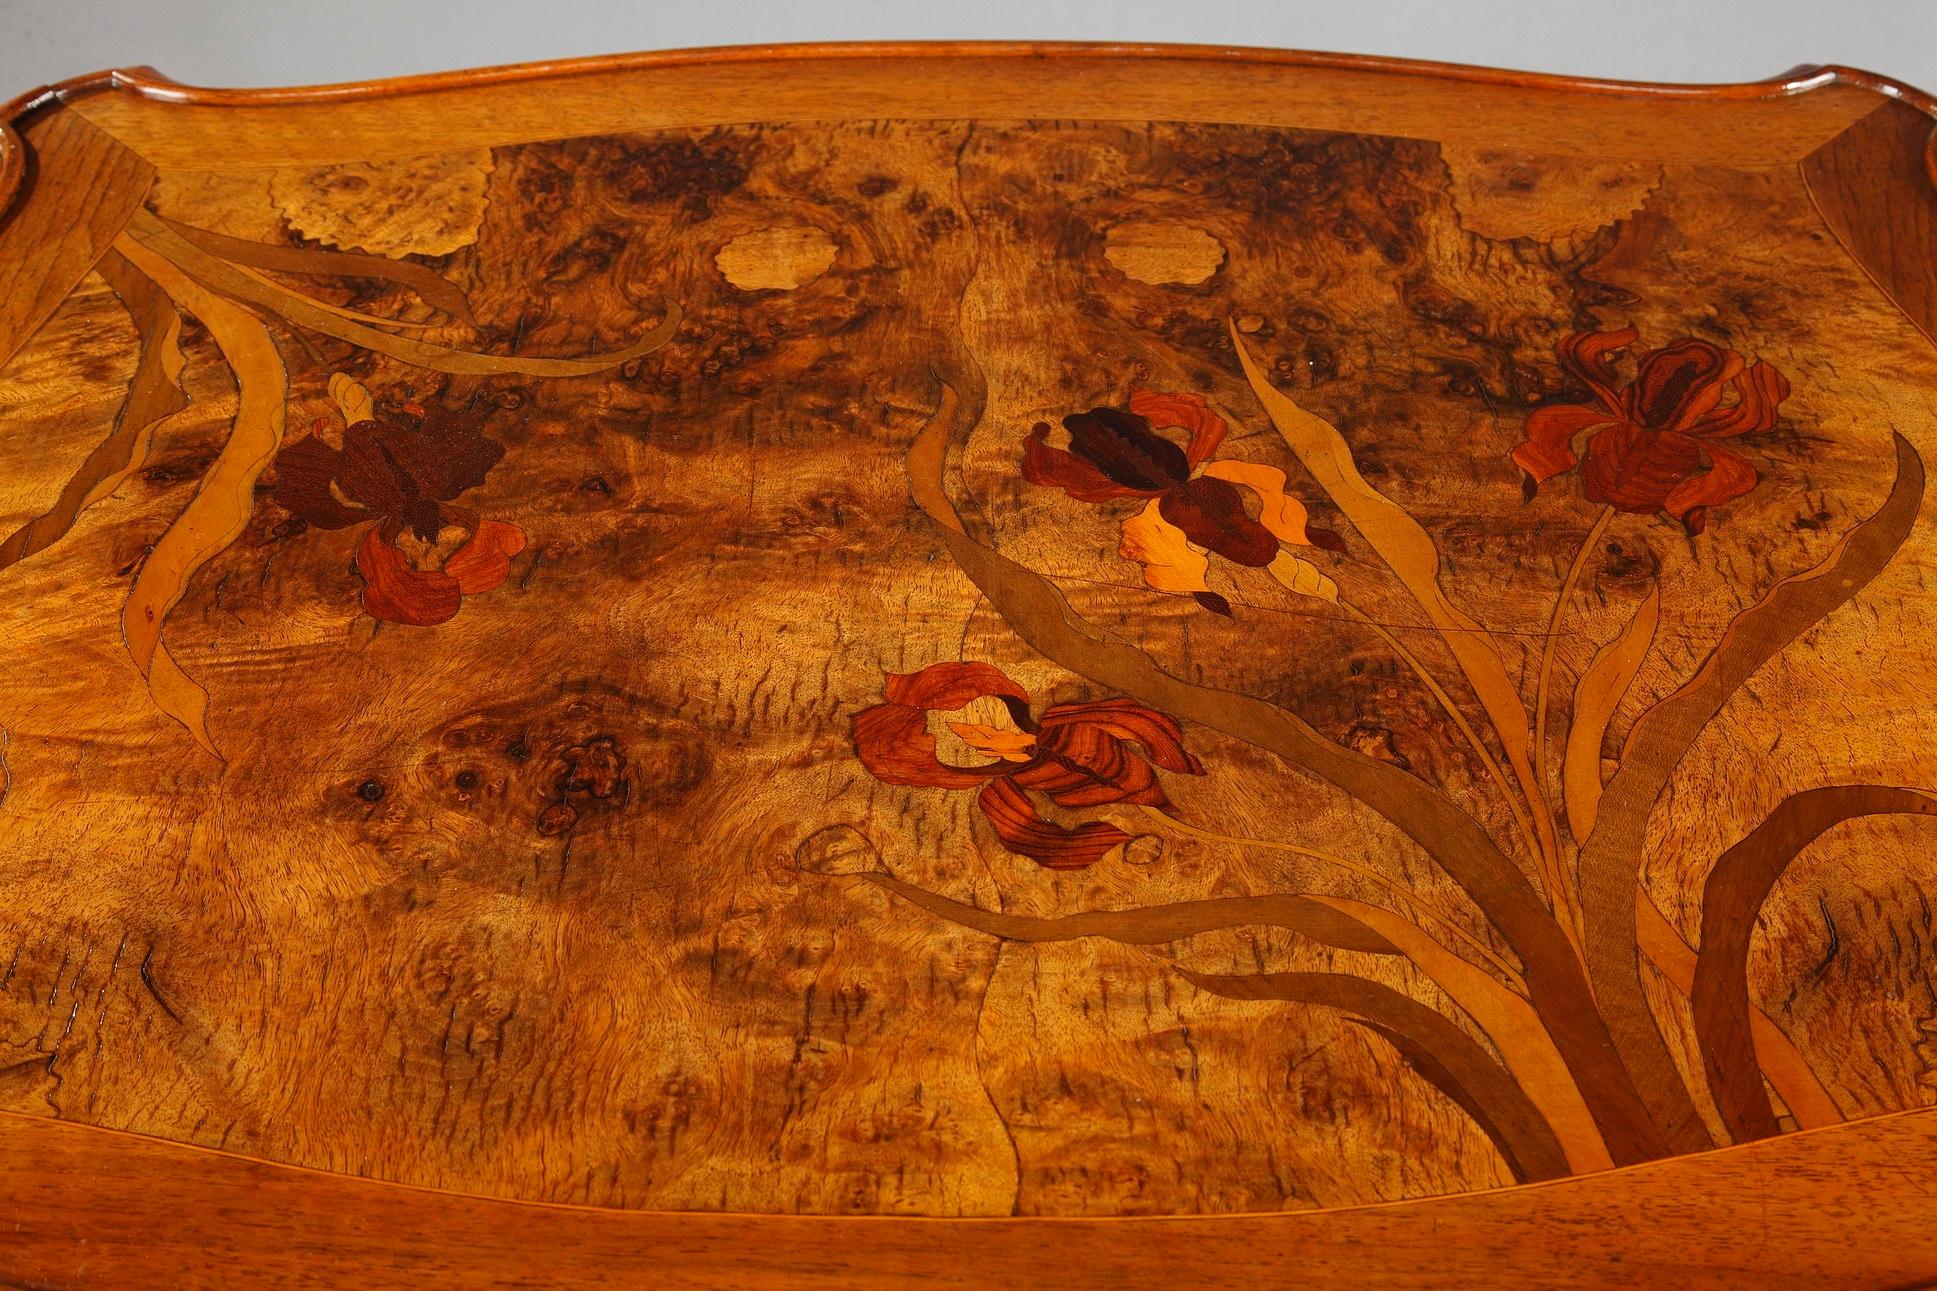 Wooden Tea Table with Polychrome Marquetry Decoration, Art Nouveau Period 1